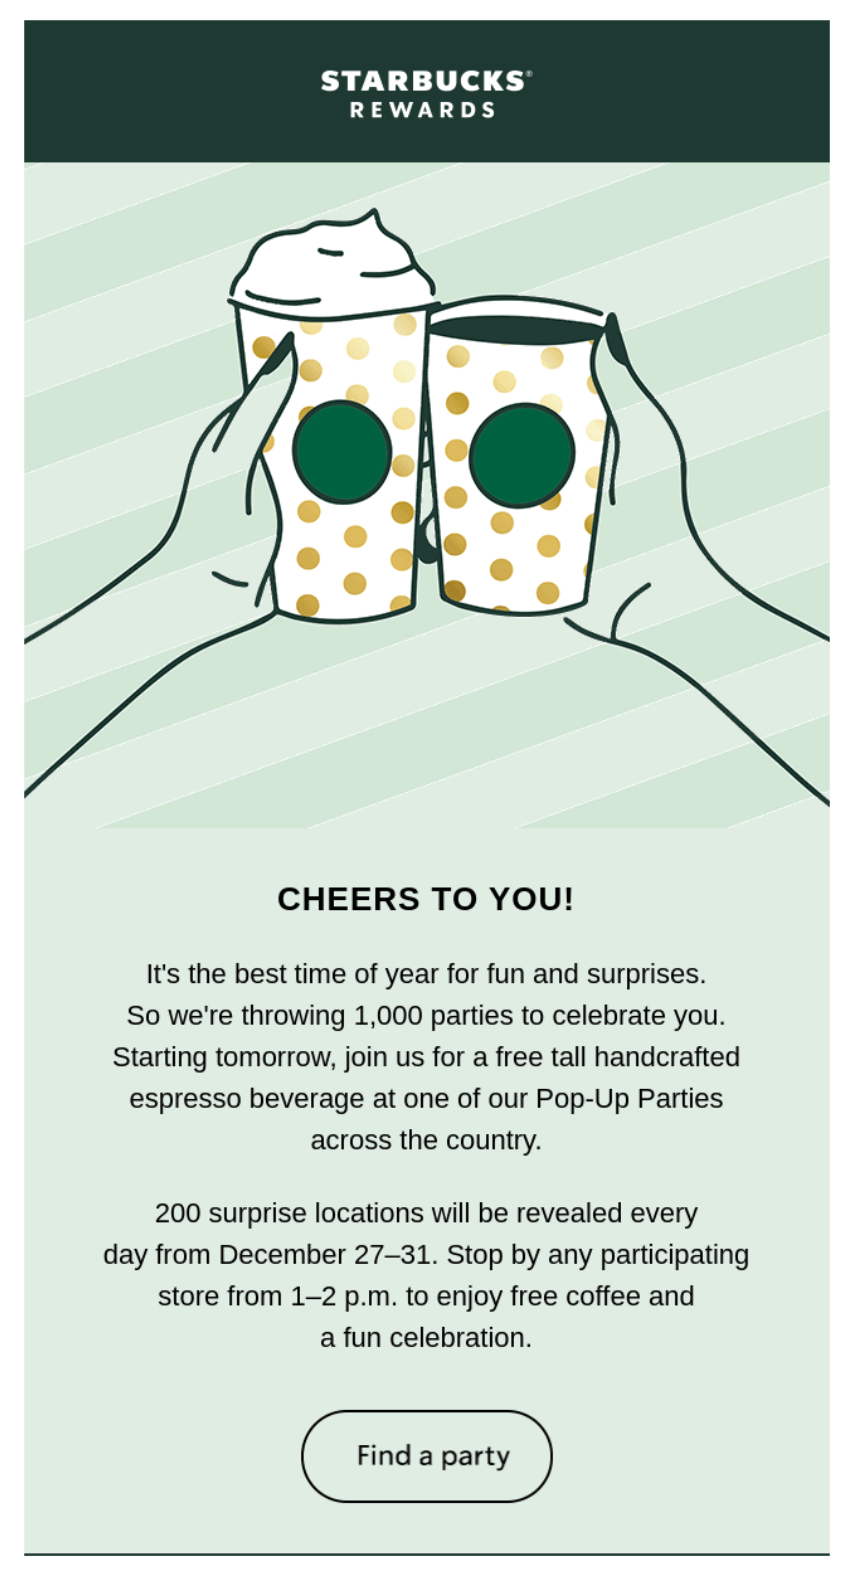 Starbucks’ email campaign